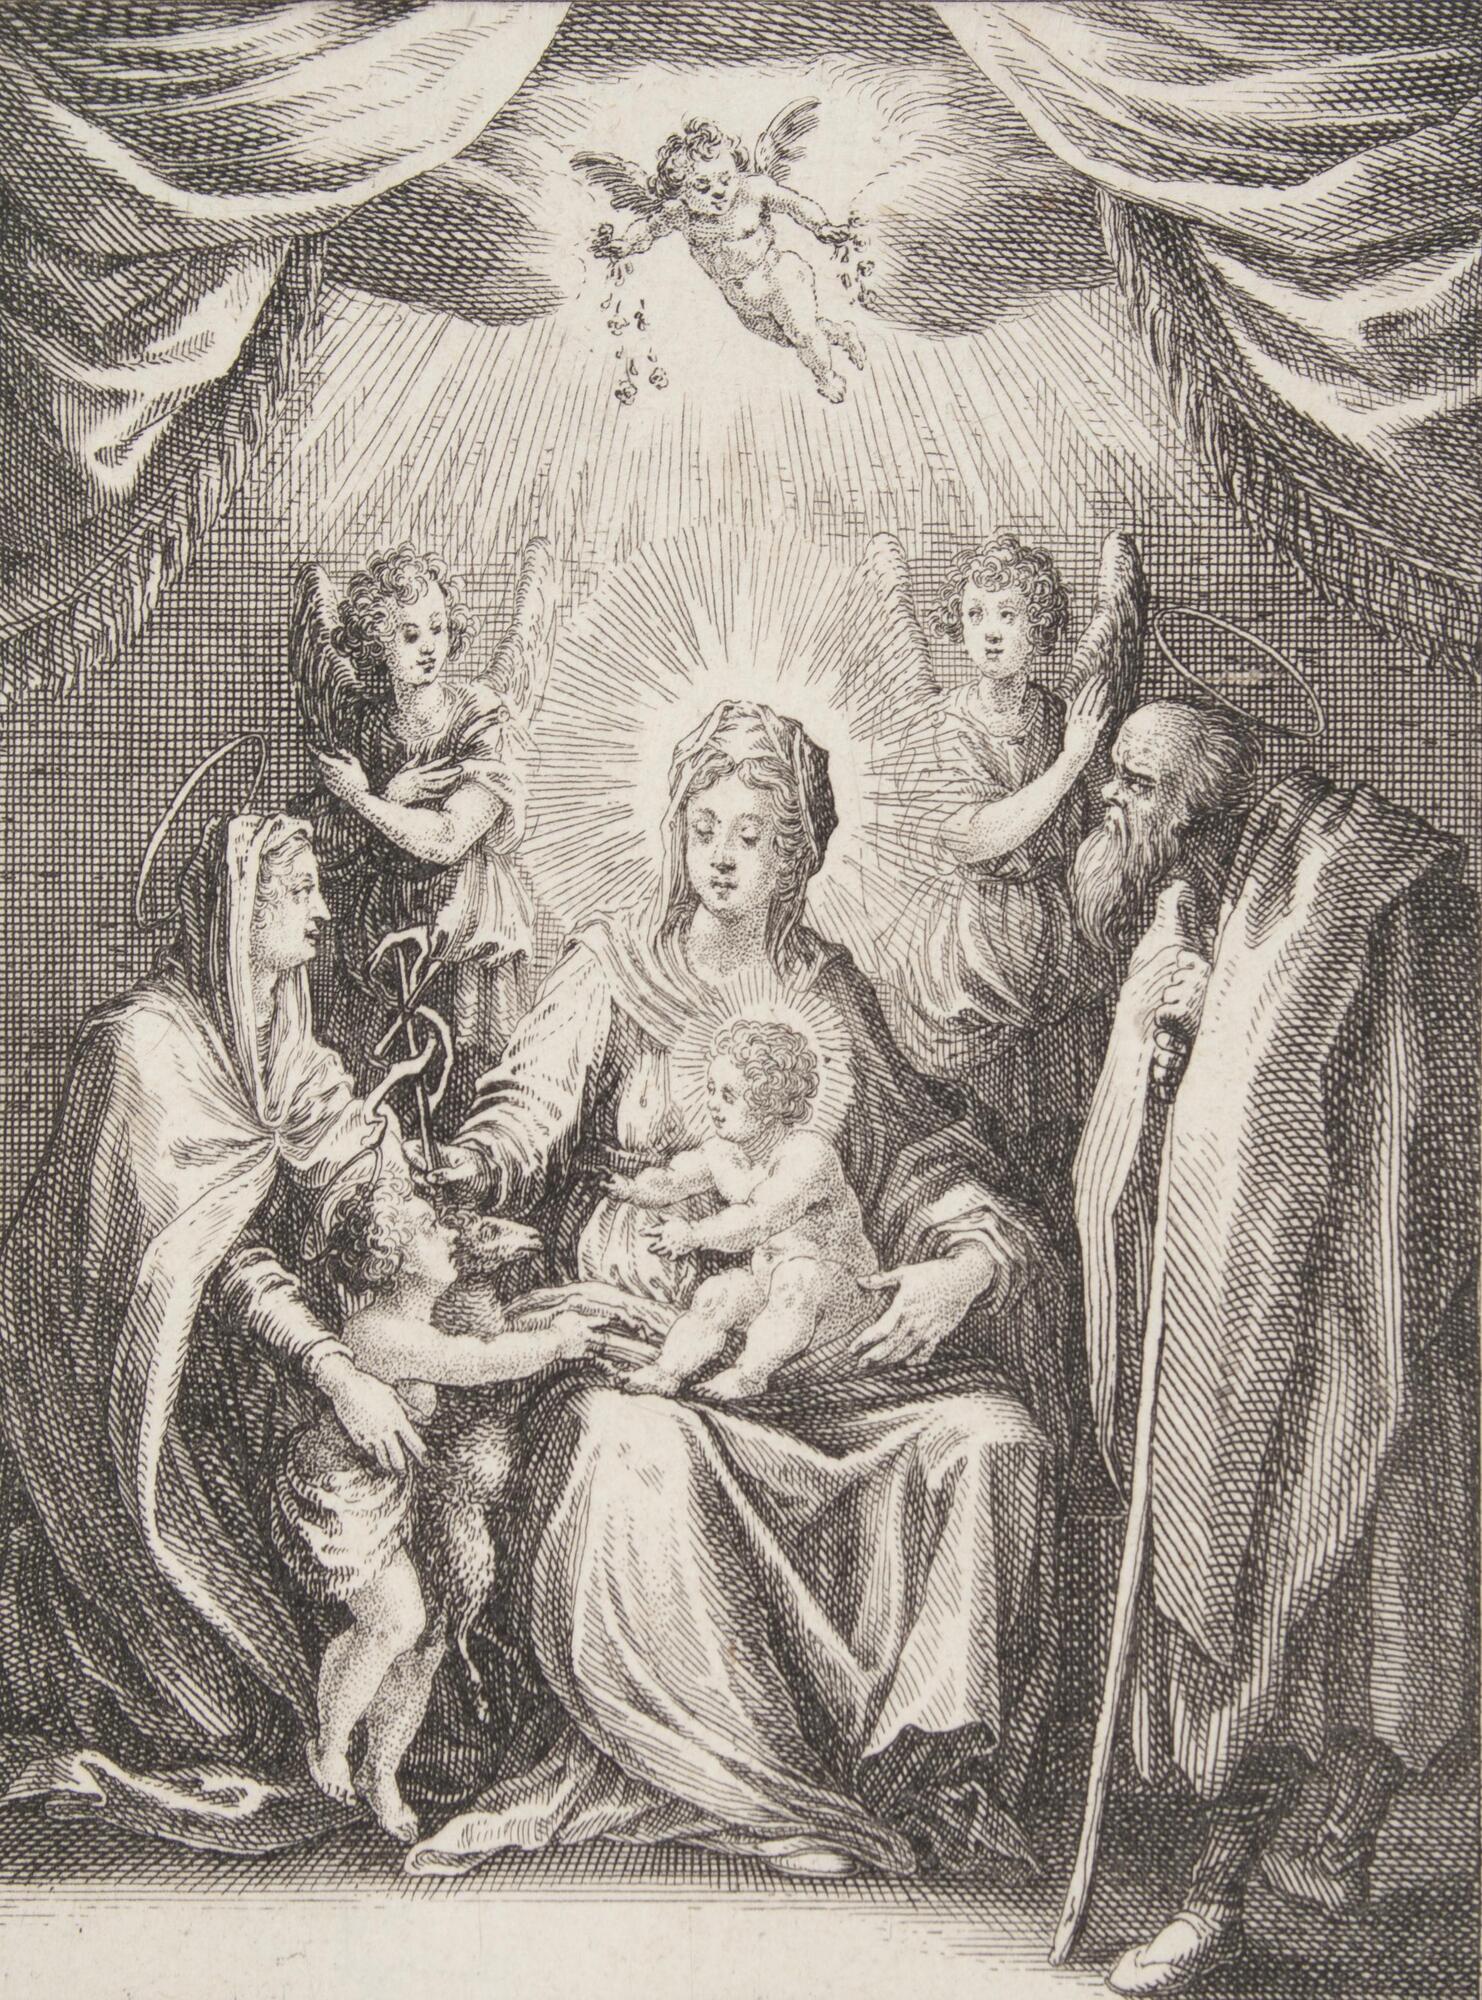 The Virgin Mary seated with an infant on her lap. She is surrounded by angels and two saints on either side. To her left, the little St. John the Baptist looks up to her. There is a puti above sprinkling something in the air. Drapes pushed back on either side.